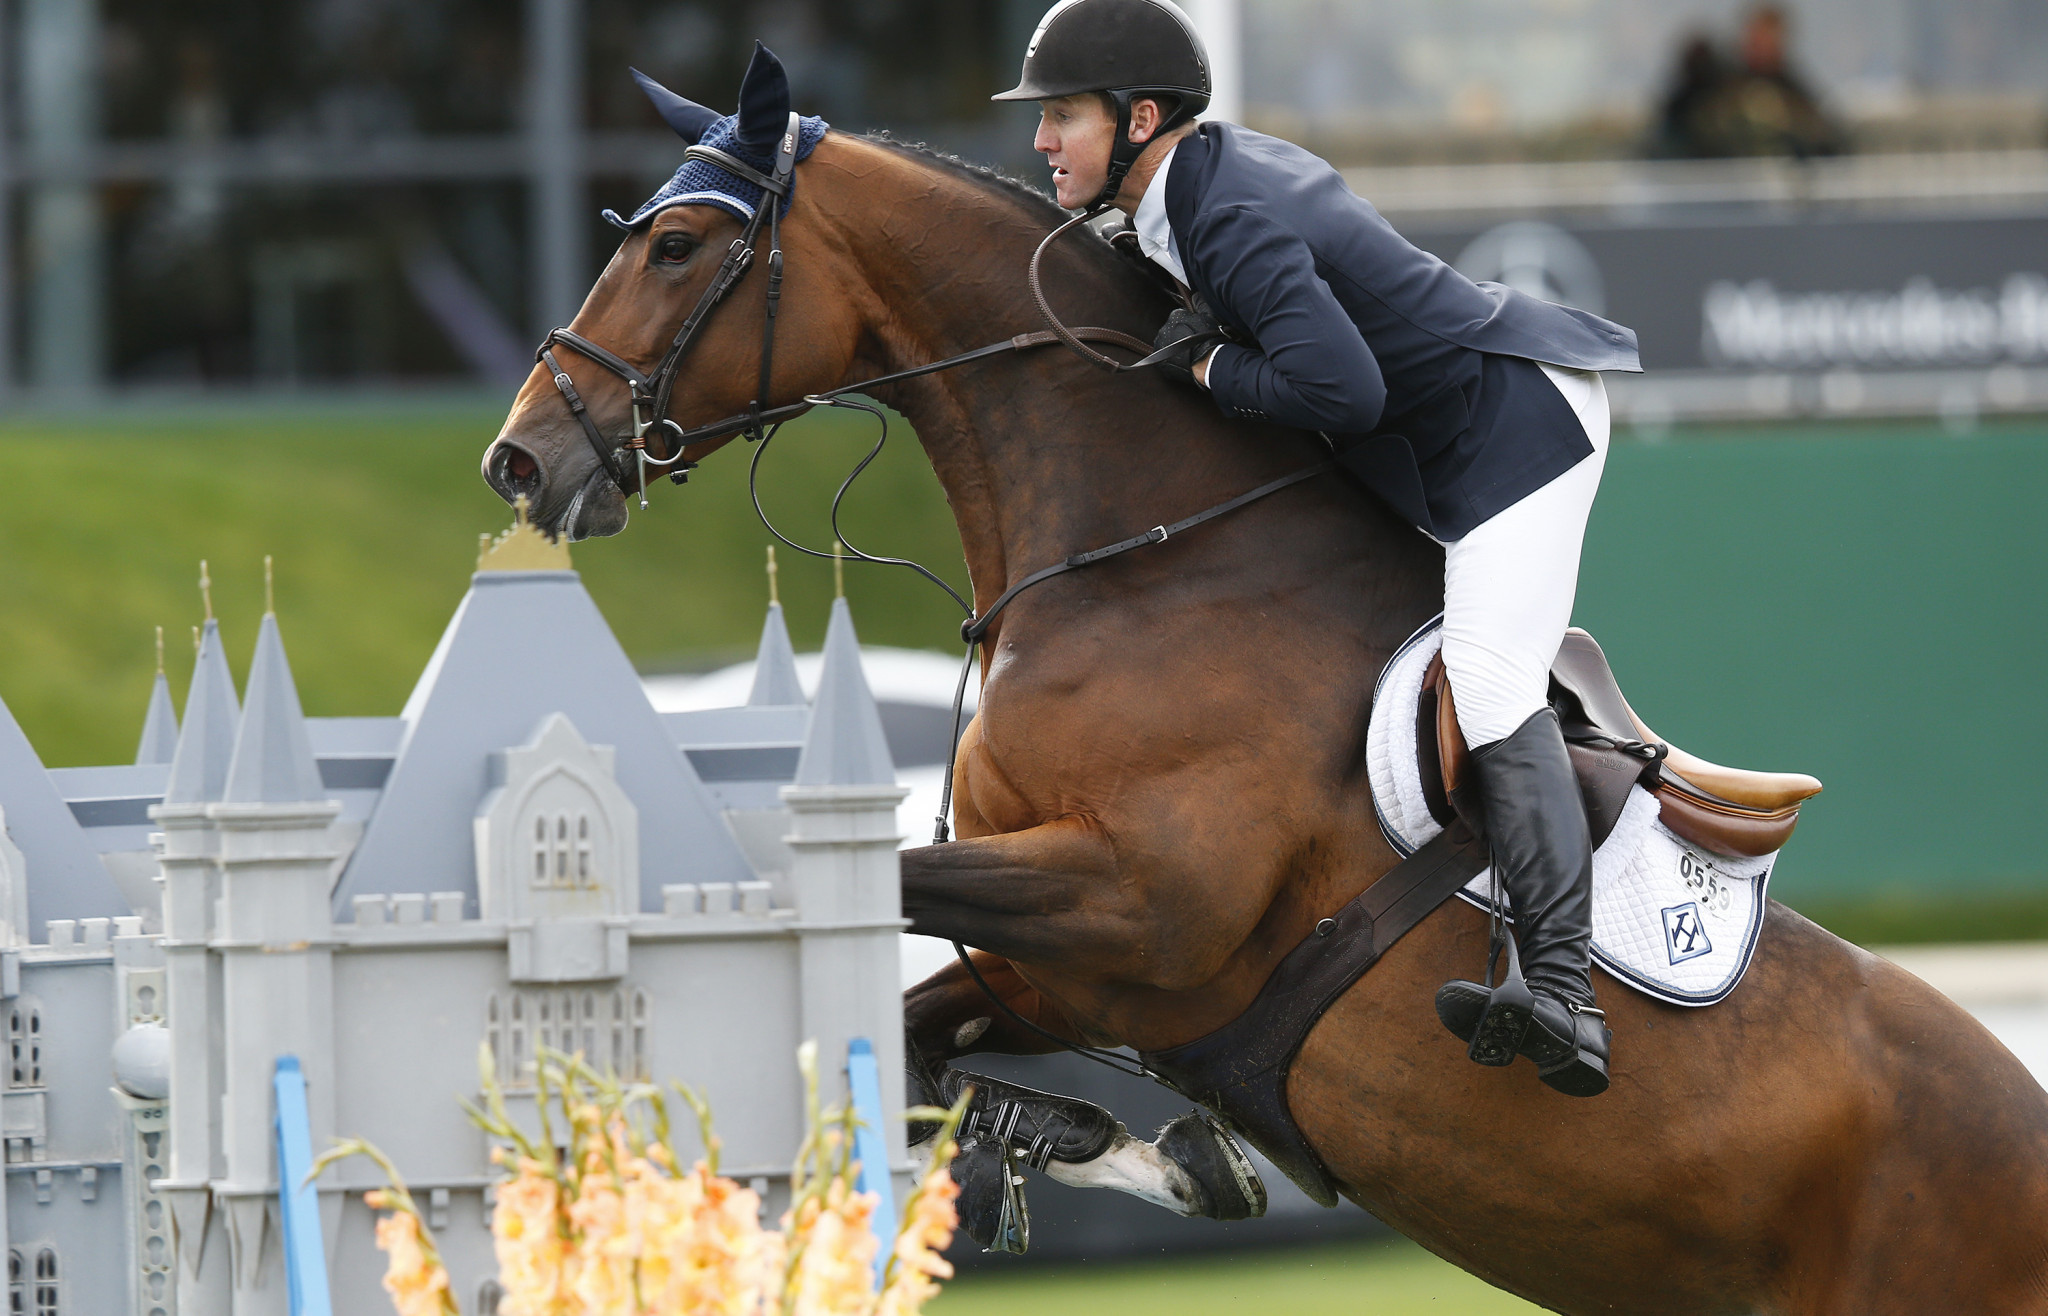 McLain Ward will be going for gold in the jumping final in Paris ©Getty Images